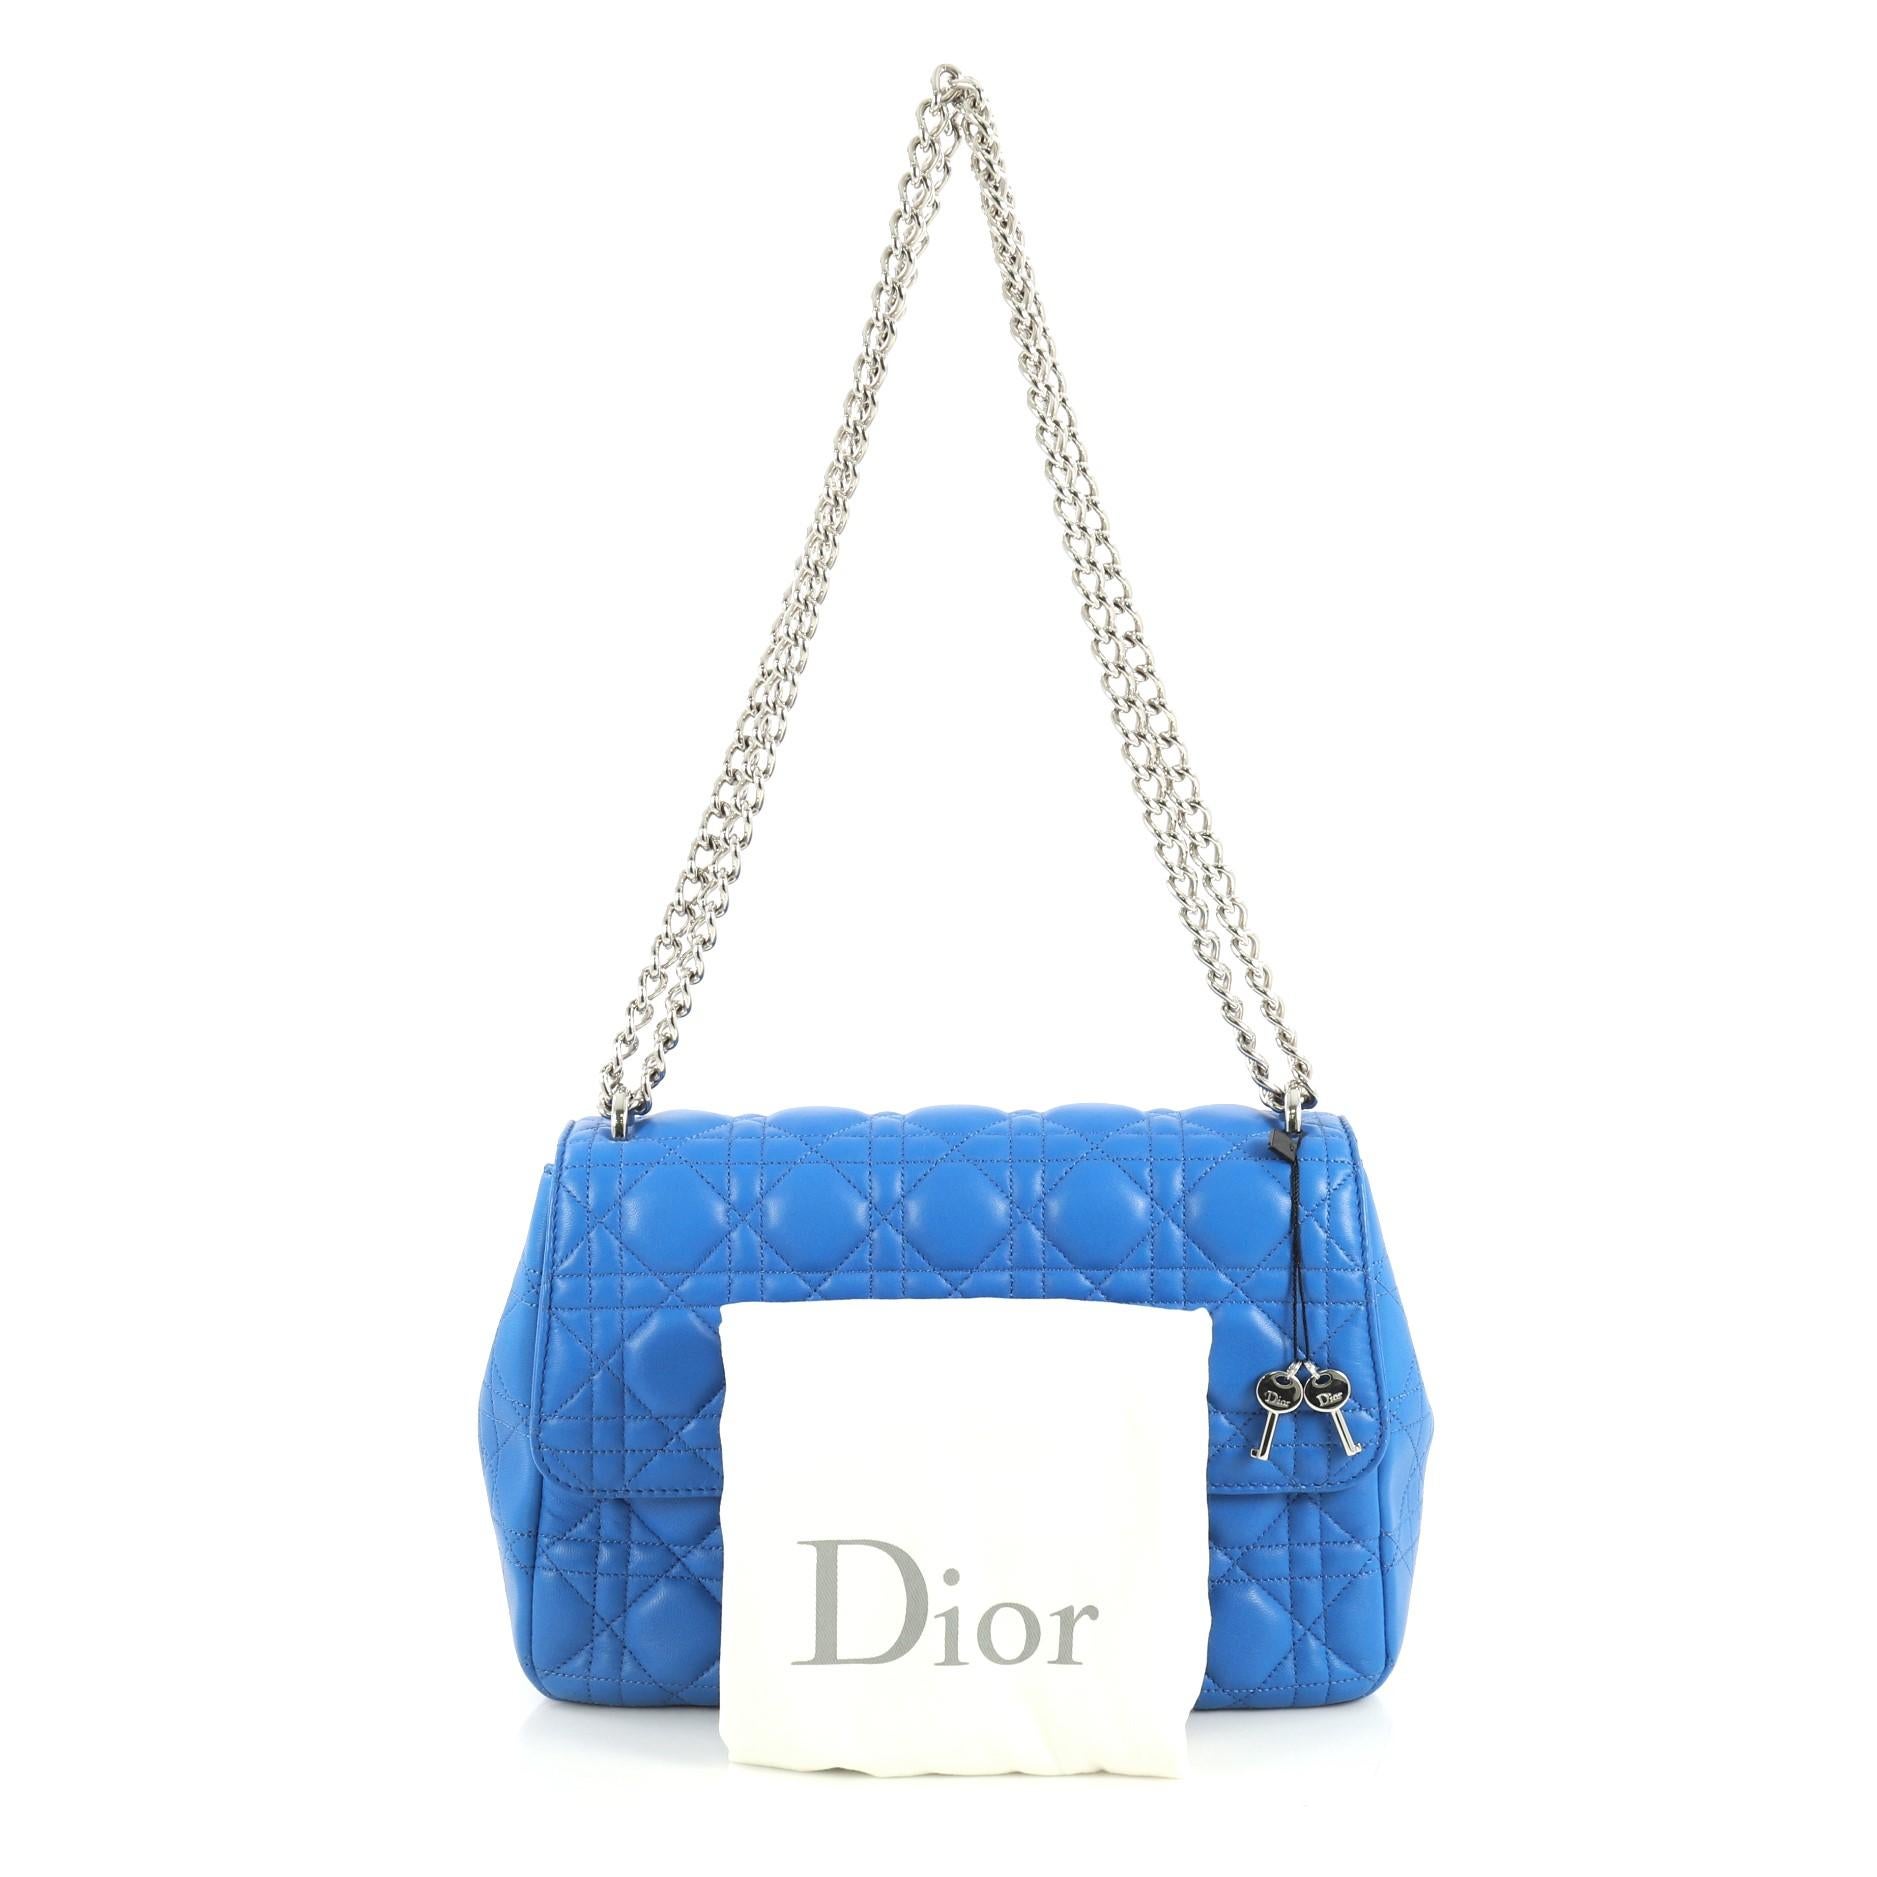 This Christian Dior Long Chain Miss Dior Bag Cannage Quilt Lambskin Medium, crafted in blue cannage quilted lambskin leather, features long chain link strap and silver-tone hardware. Its push-lock closure opens to a pink leather interior with slip